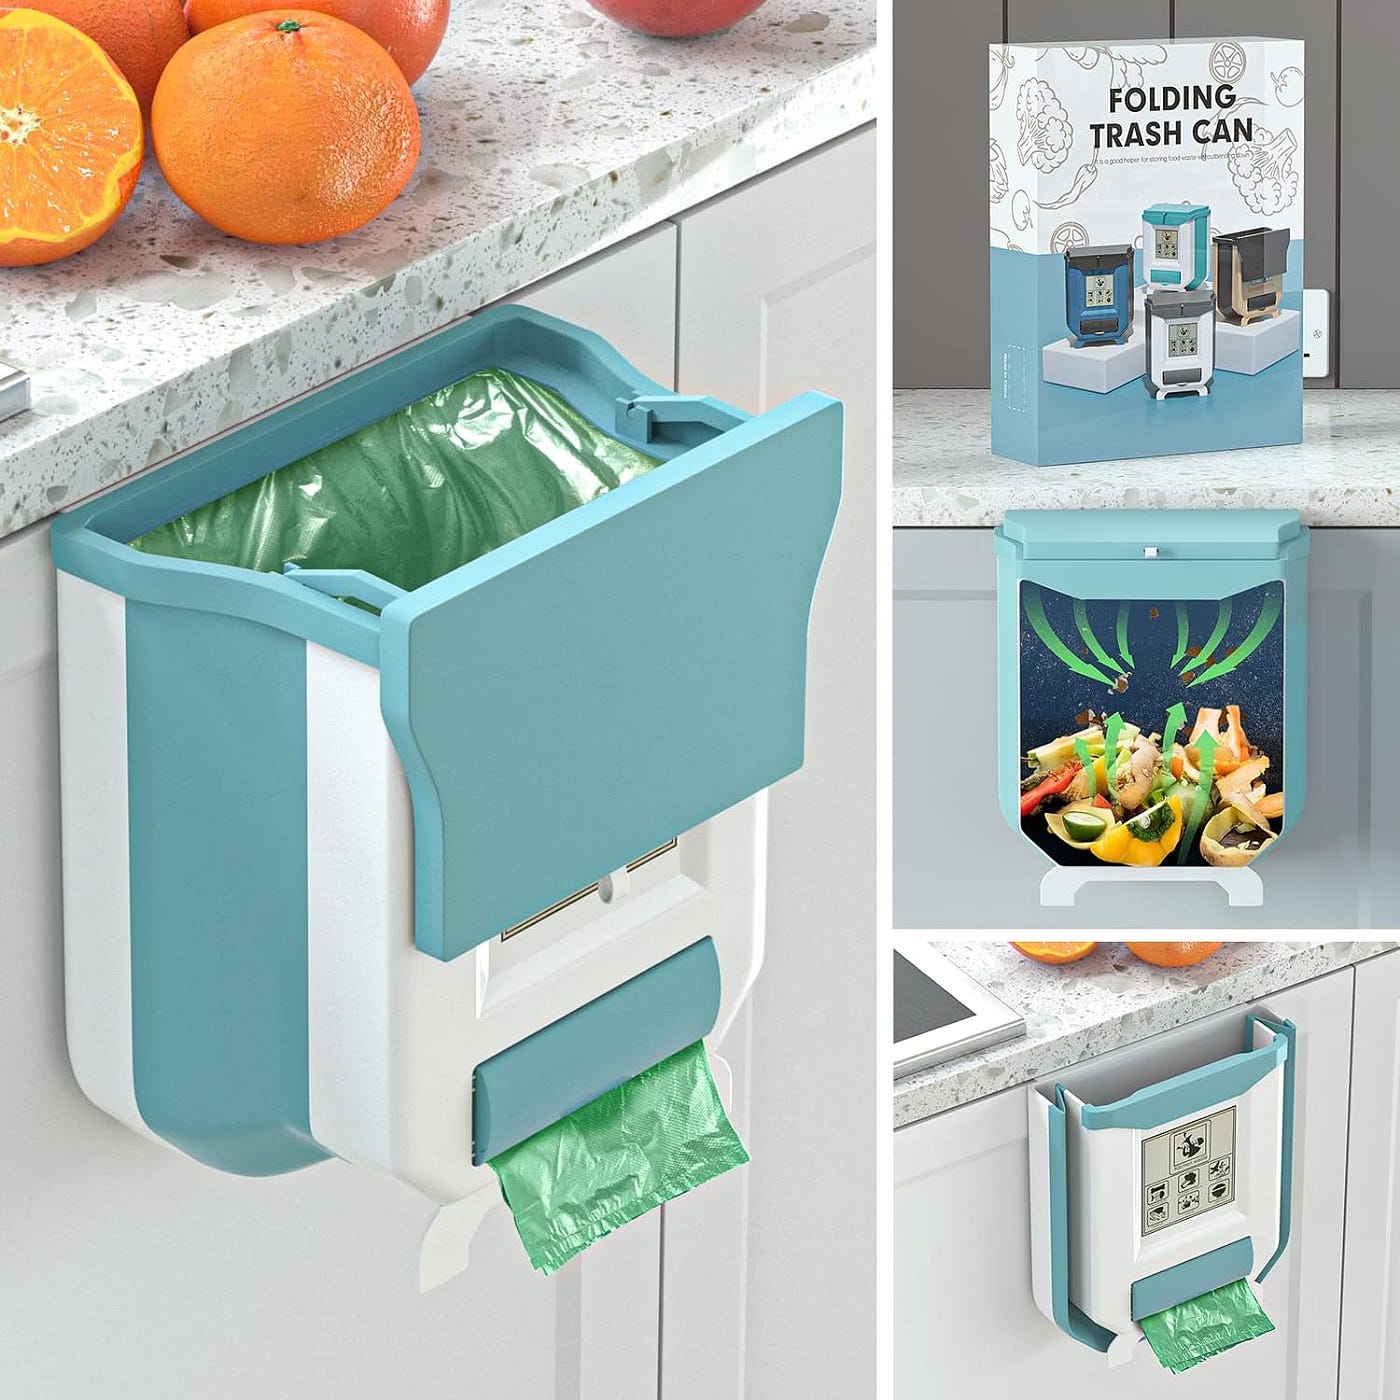 Sustainable Countertop Compost Bins - Reduce Waste and Embrace Minimalism